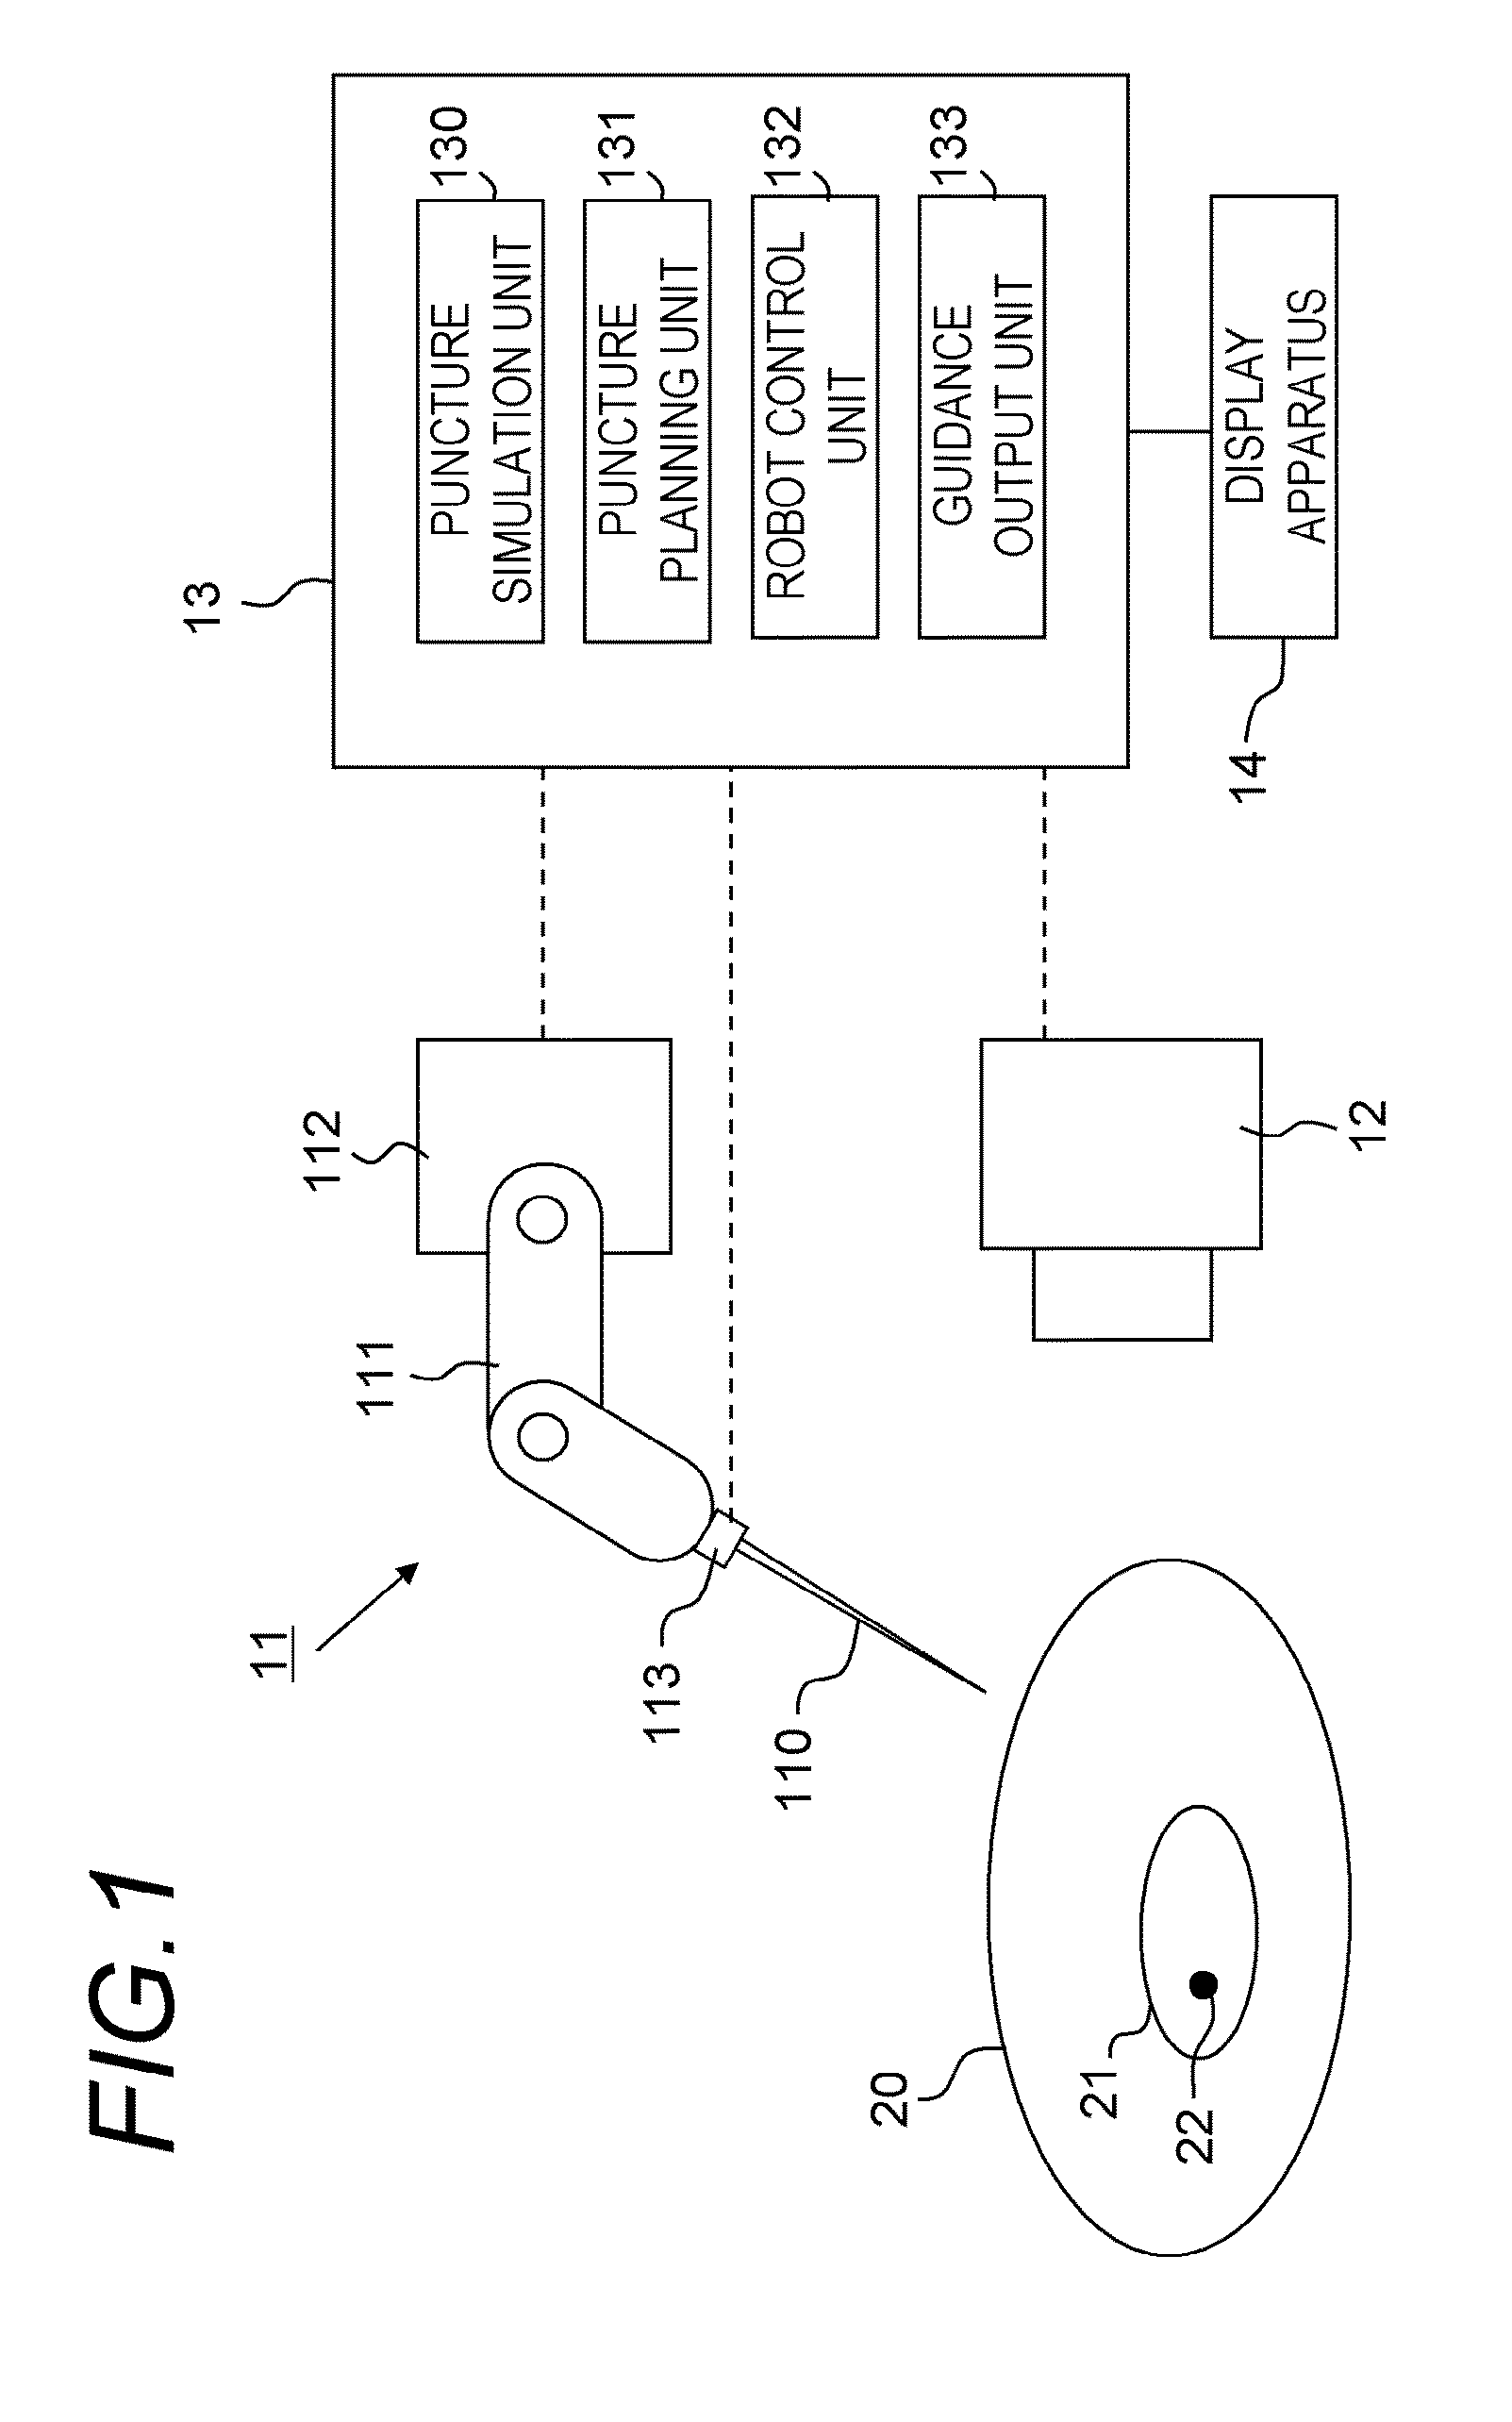 Puncture planning apparatus and puncture system